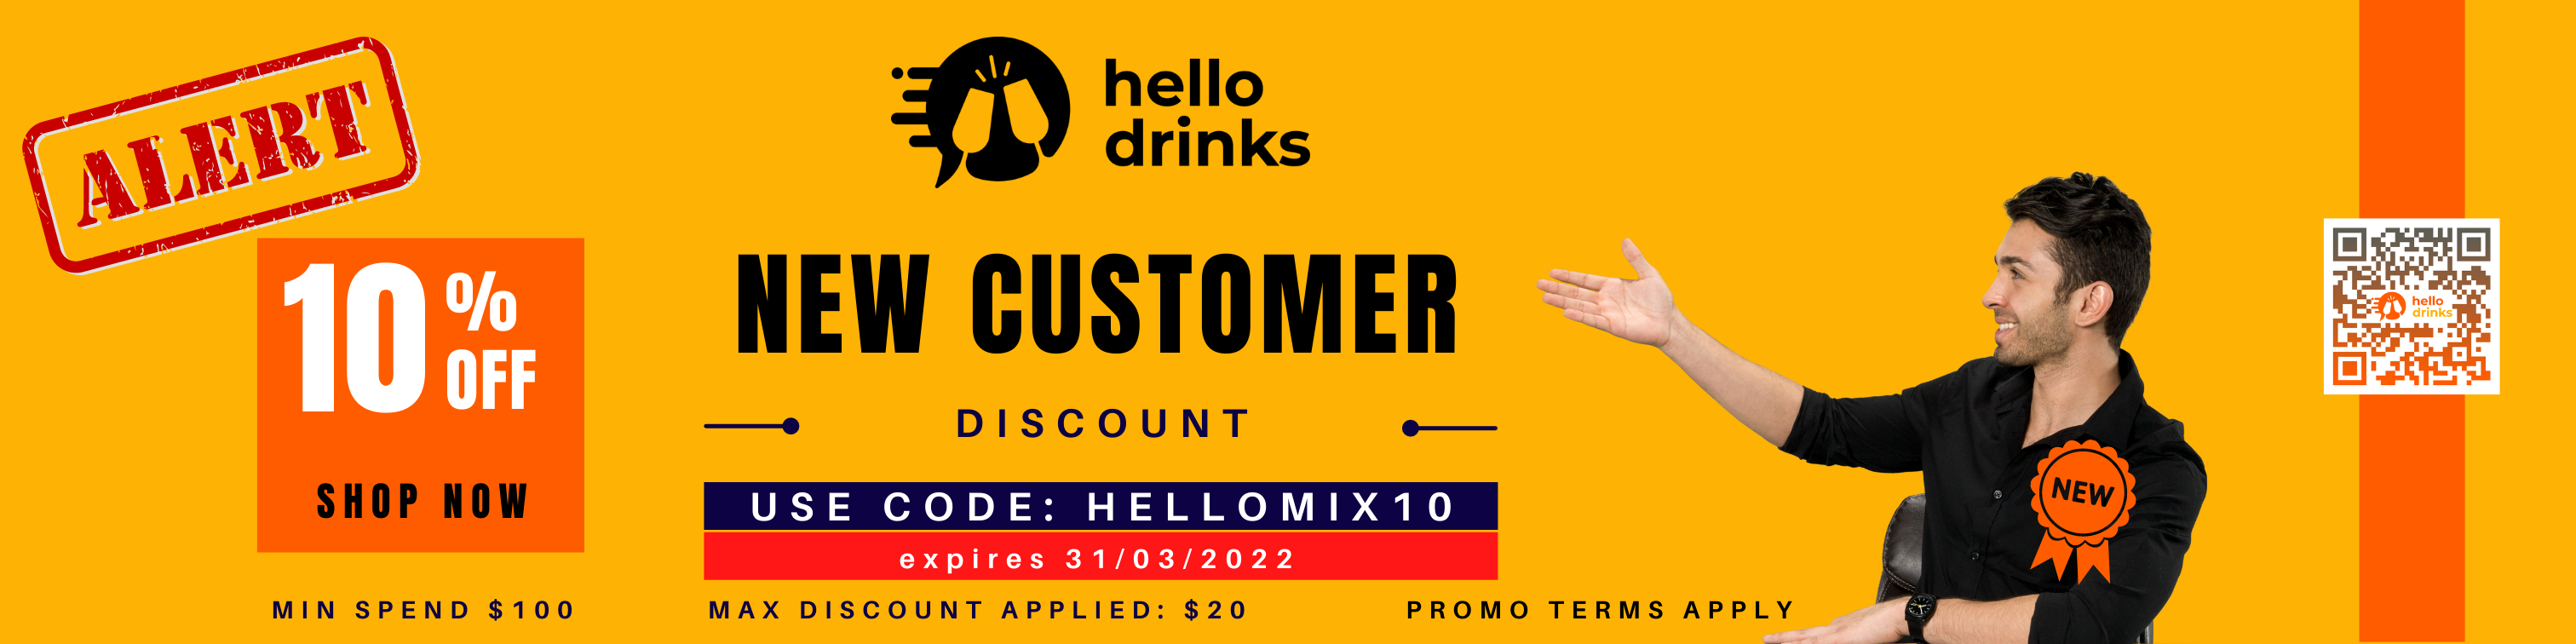 customer-discounts-cash-back-rewards-hello-drinks-liquor-superstore-afterpay-alcohol-delivery